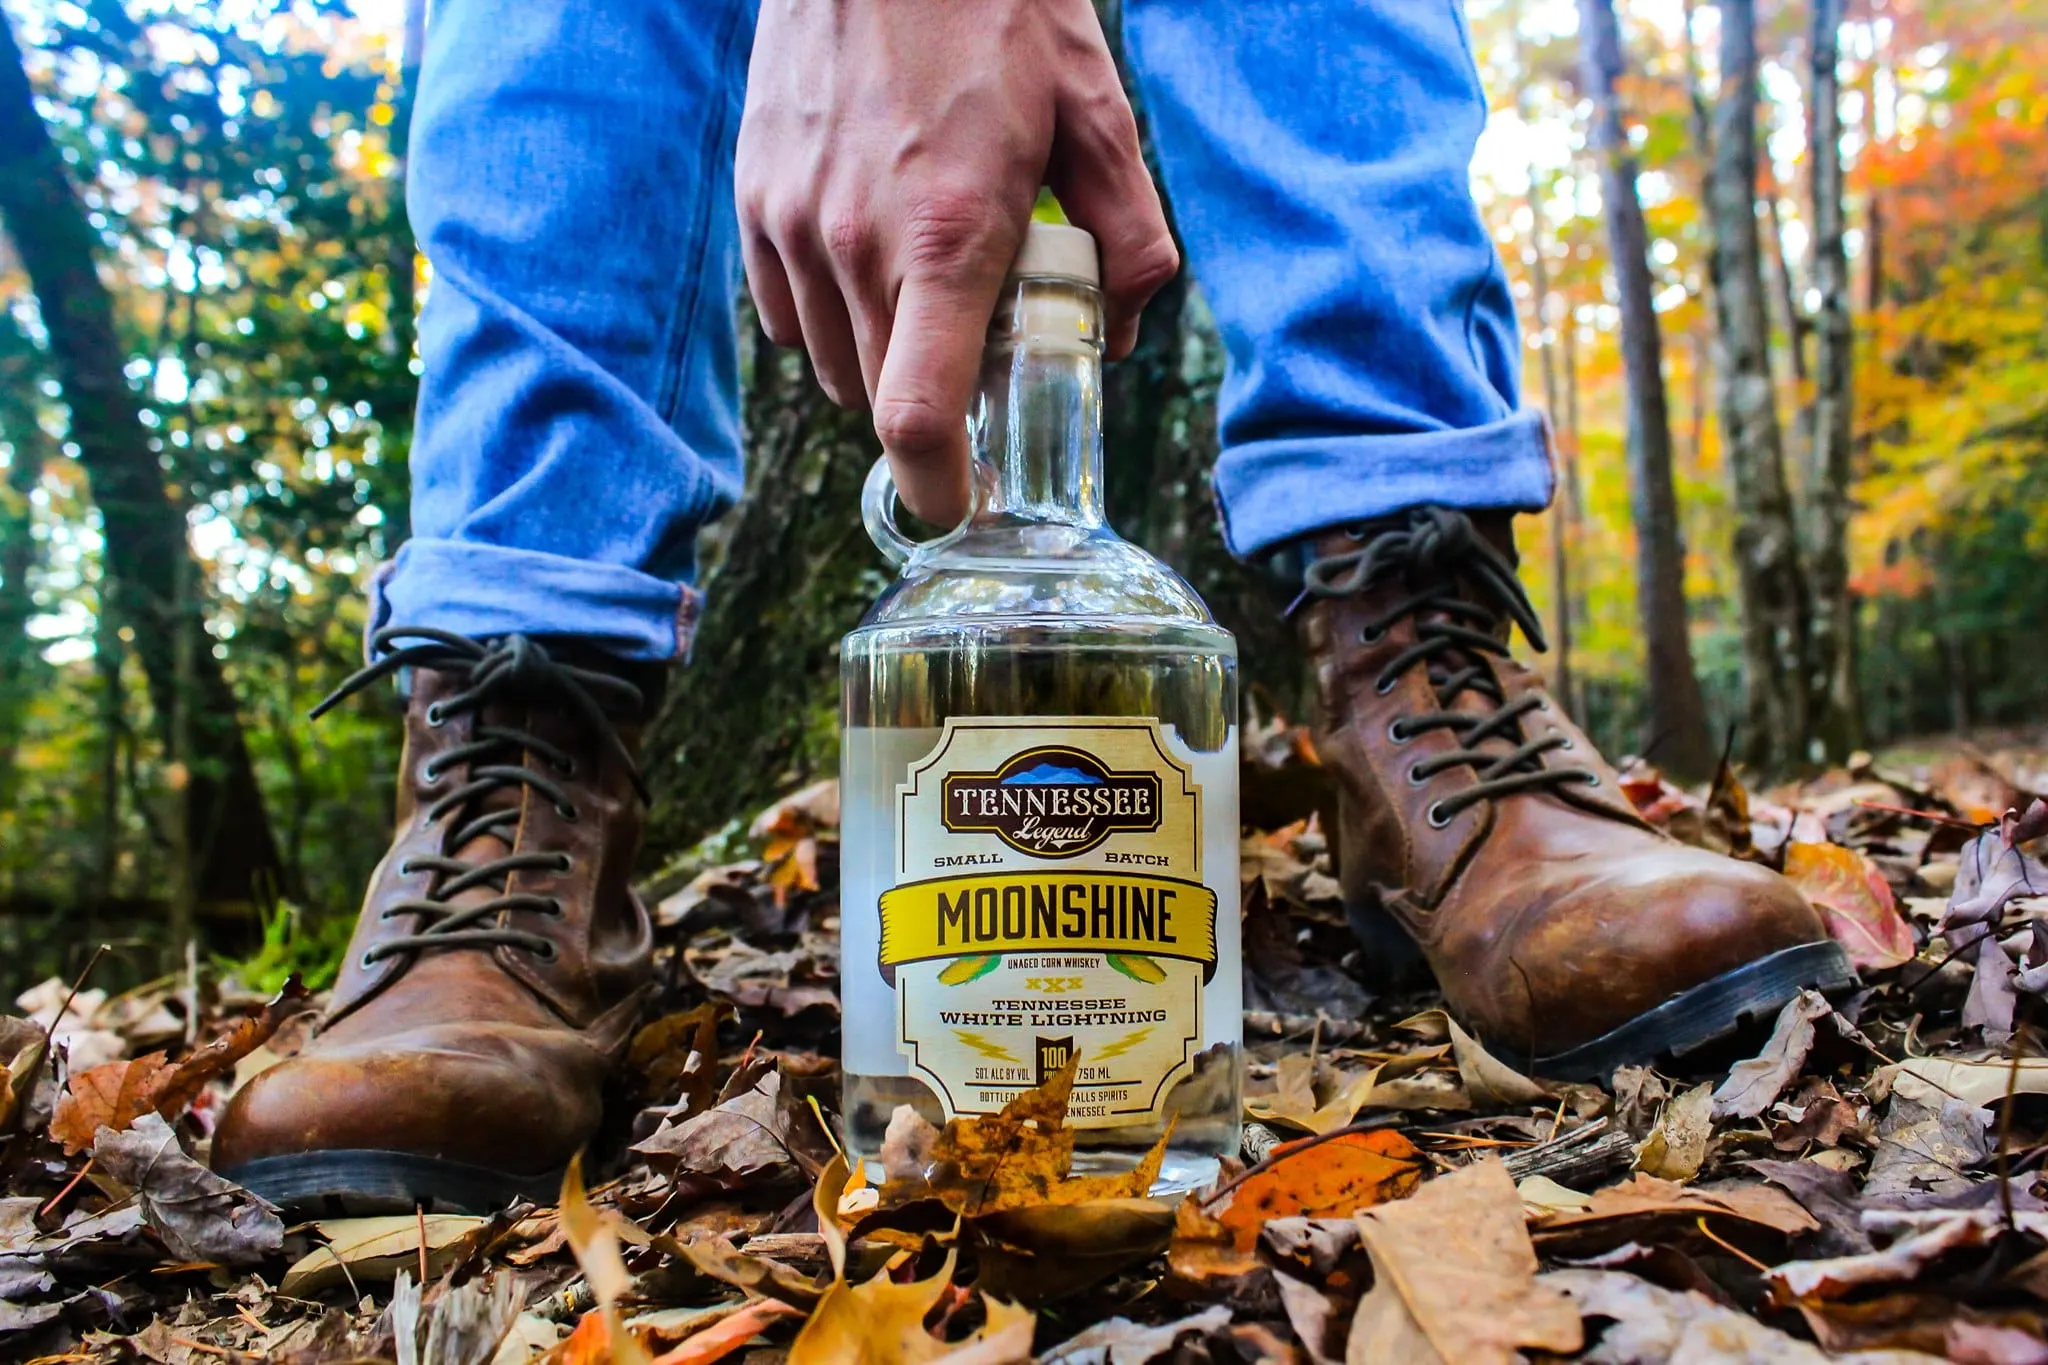 man holding a bottle of white lightning moonshine from tennessee legend distillery on the ground with fall foliage